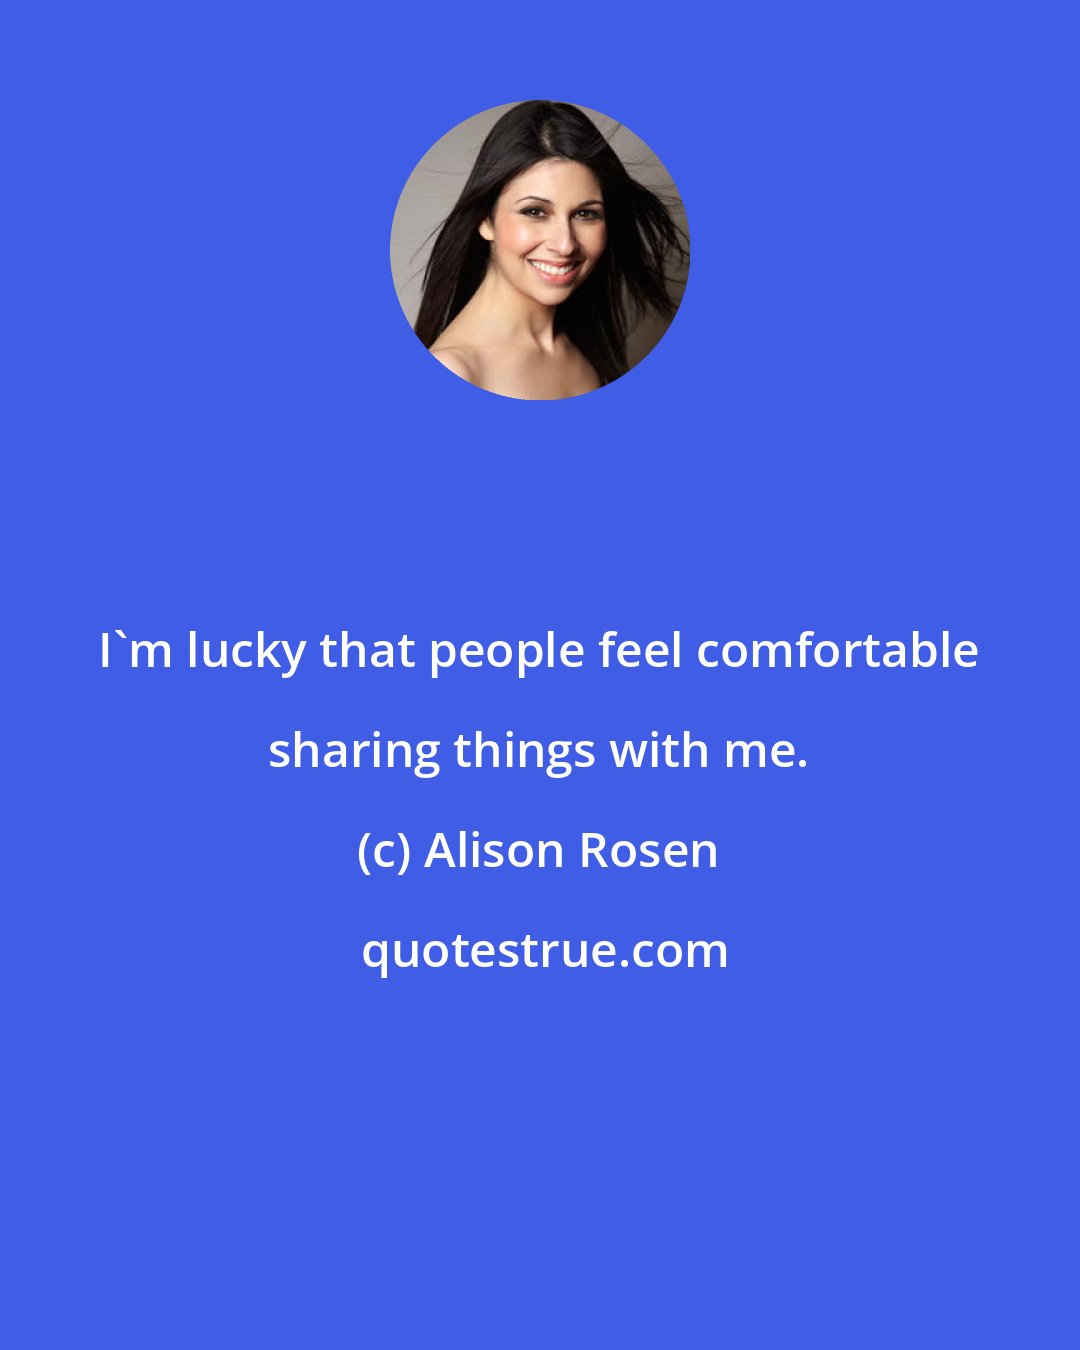 Alison Rosen: I'm lucky that people feel comfortable sharing things with me.